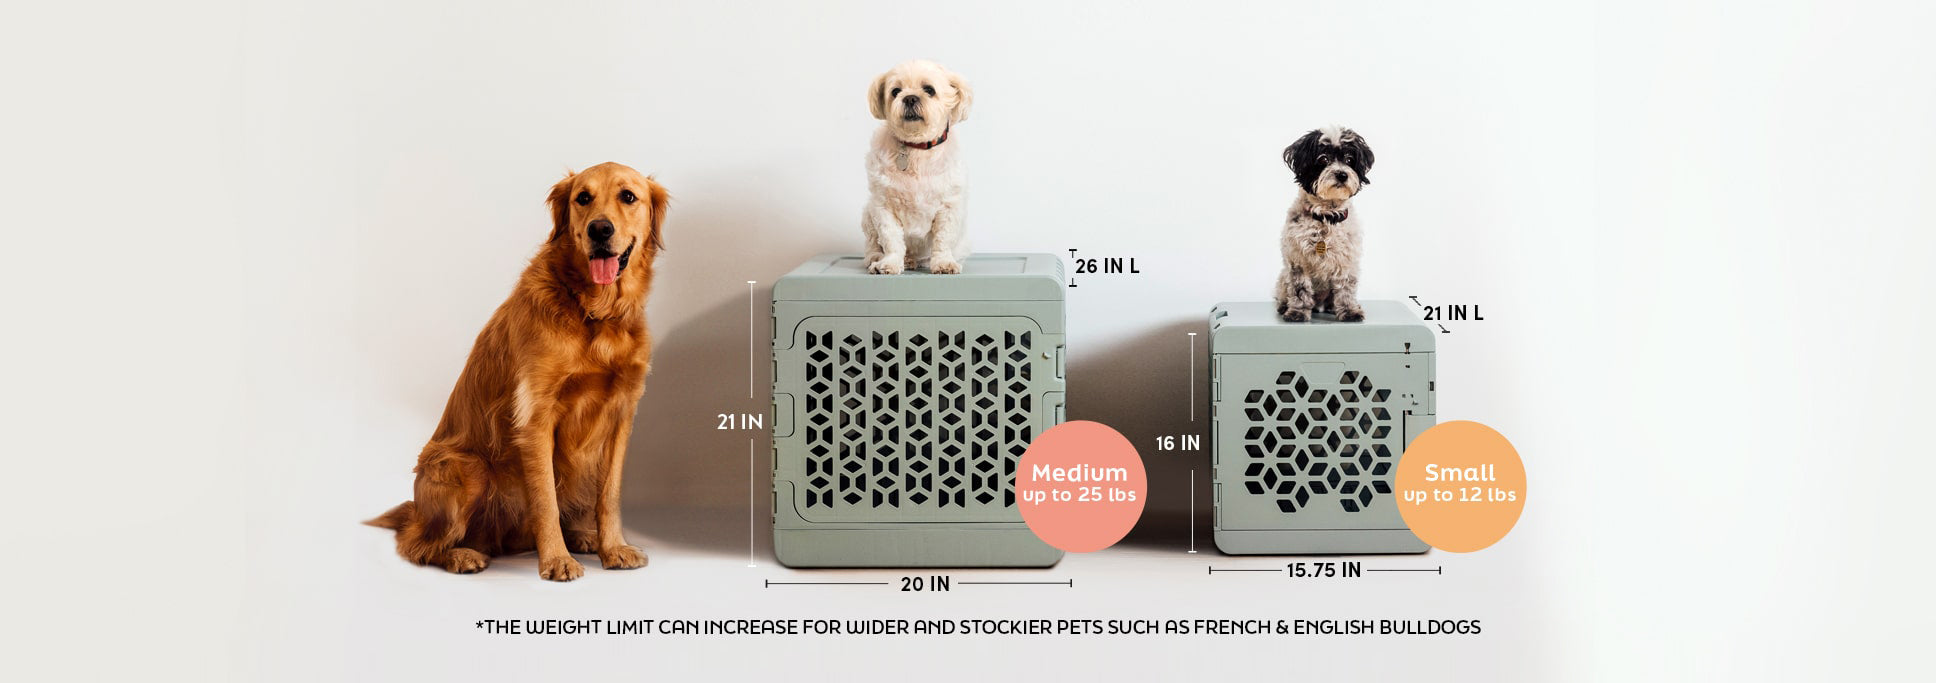 sizing guide for PAWD dog crate, medium crate is 21 inches high, 20 inches wide, and 26 inches in length. The small crate is 16 inches high, 15.75 inches wide, and 21 inches in length. The image has three dogs showing the size reference. On the medium crate is an 18 lb white dog and the small crate has 8 lb black and white dog on it